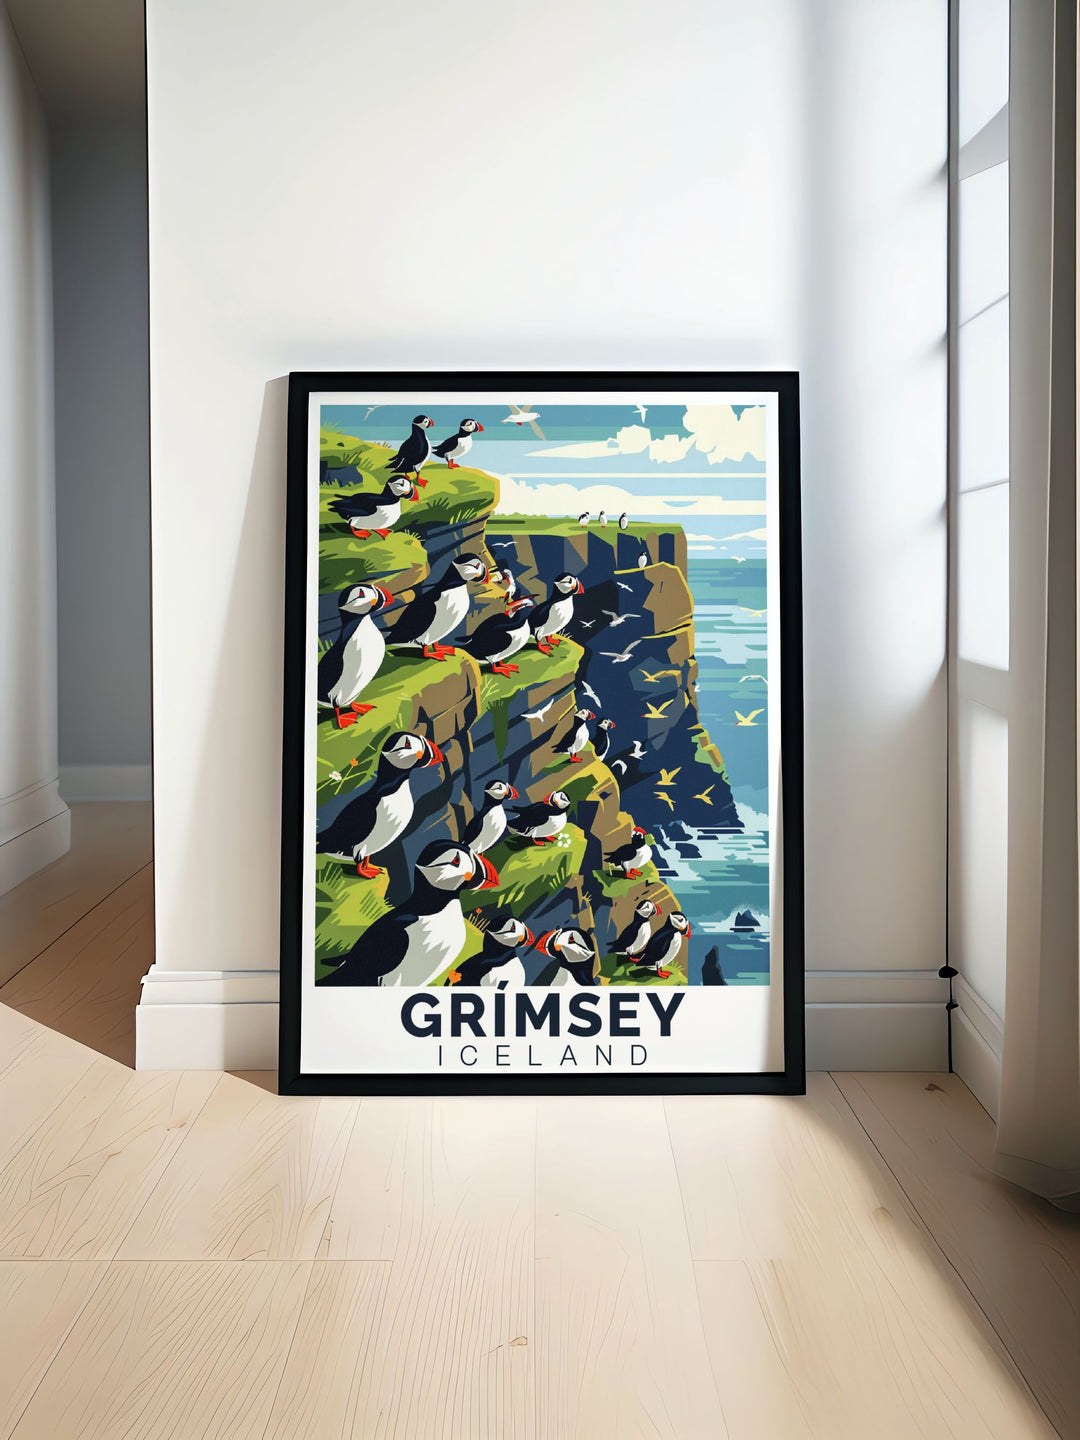 Featuring the historic Grímsey Lighthouse and the vibrant puffin colonies, this travel poster brings the islands natural beauty and rich history into your home decor.